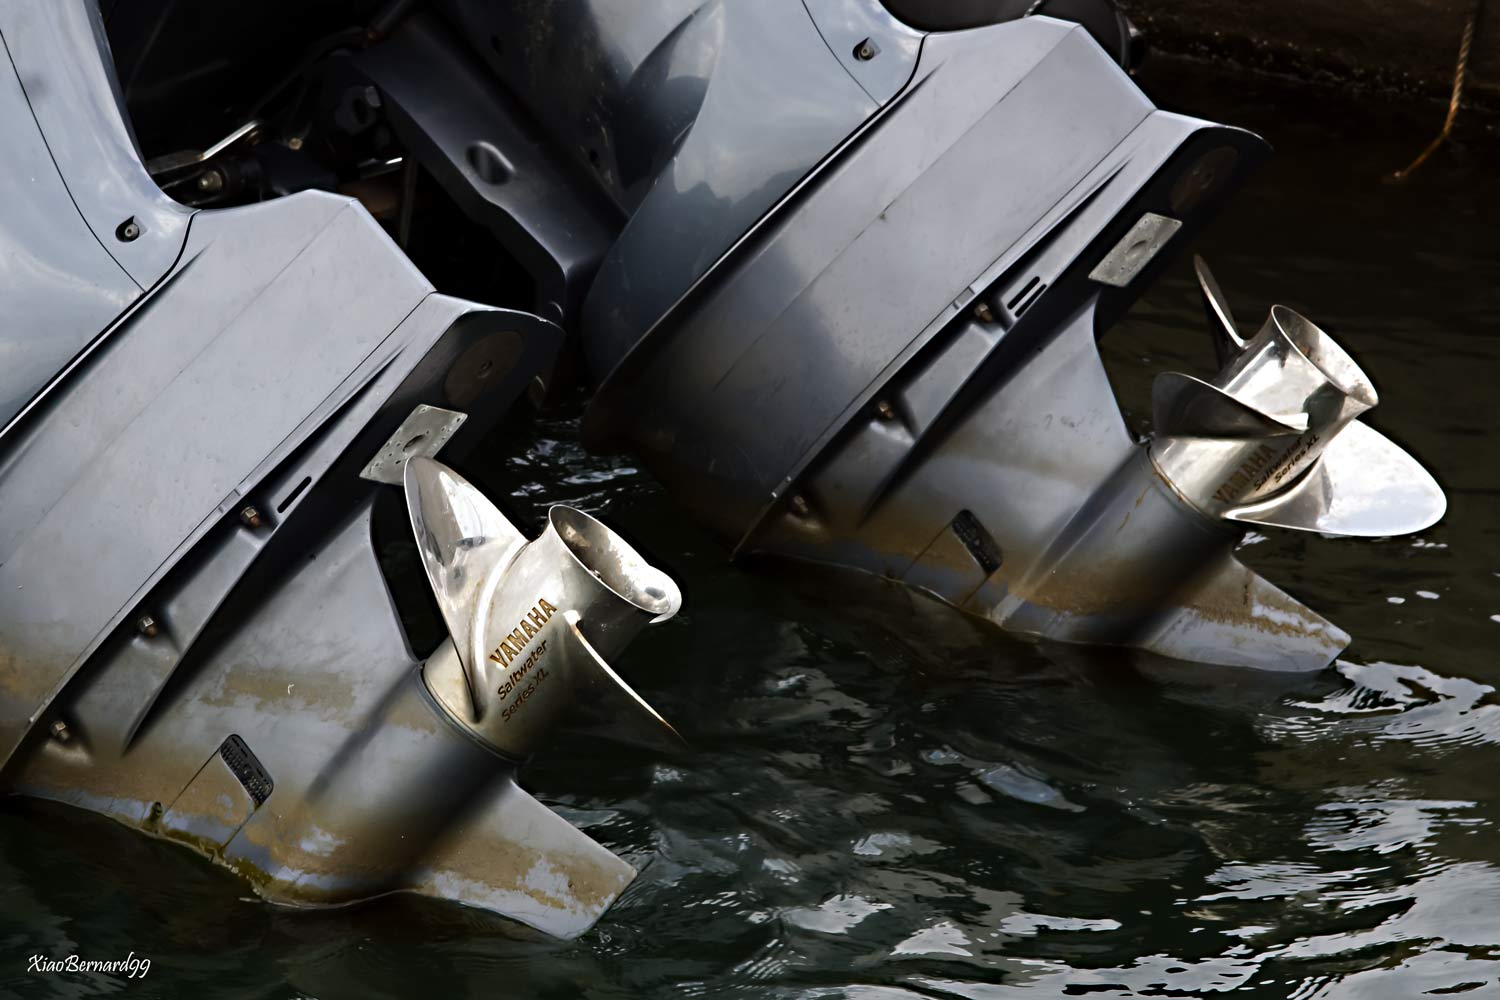 Motorisation of the Outboard 